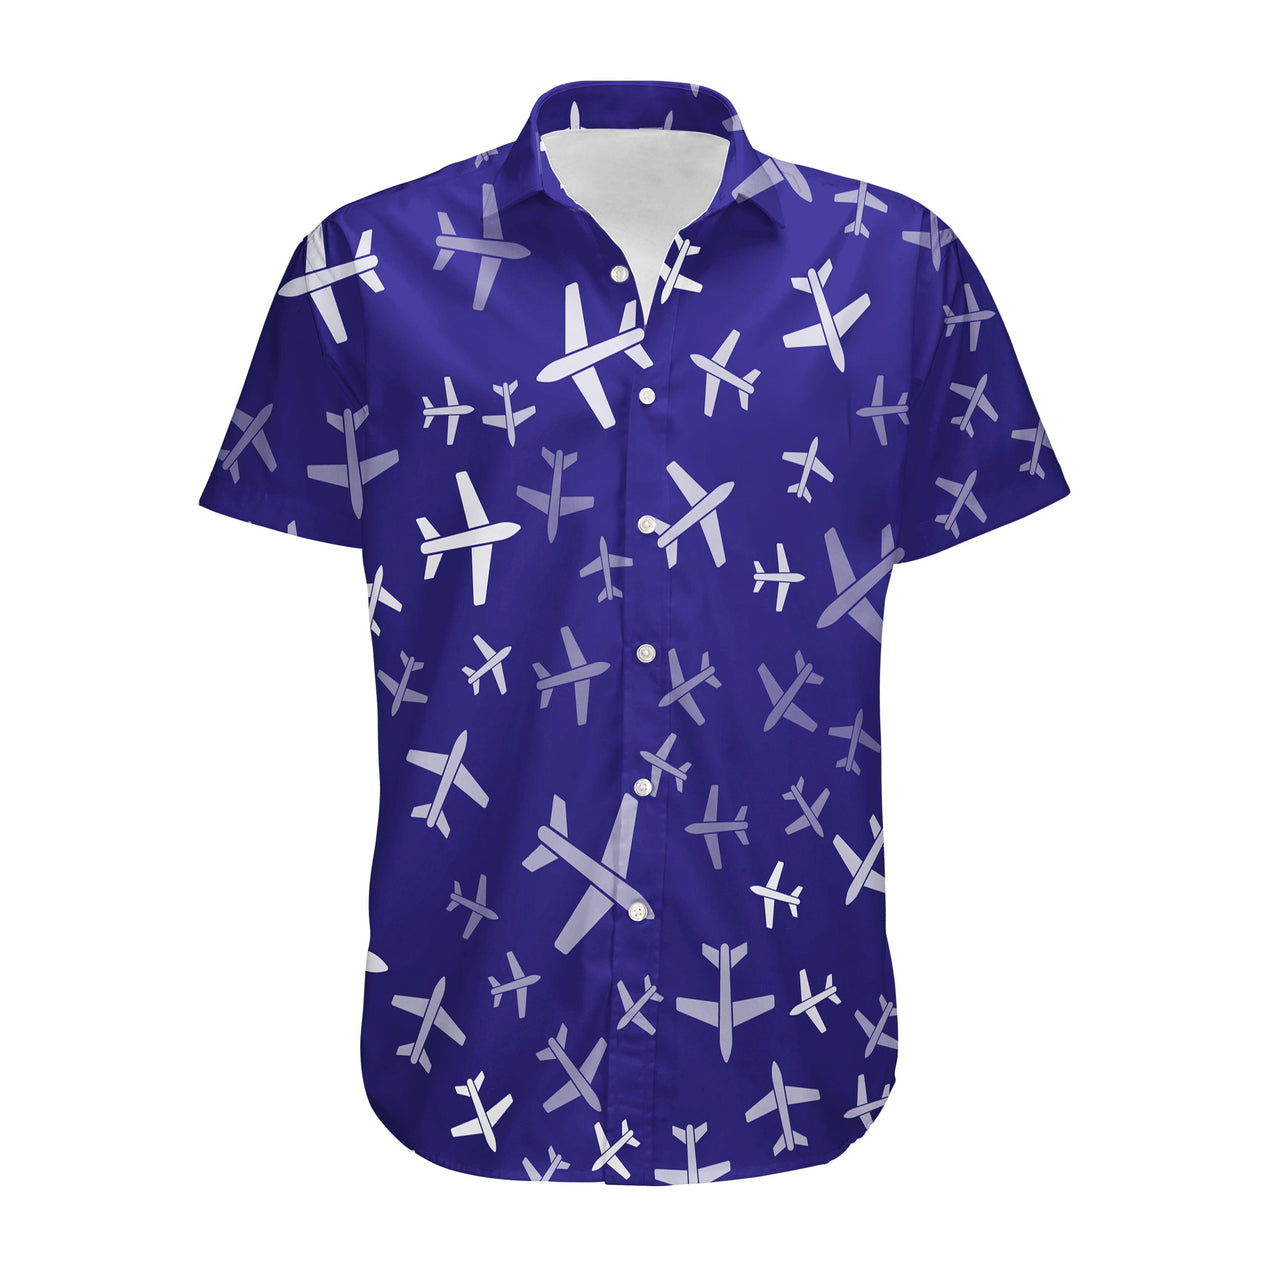 Different Sizes Seamless Airplanes Designed 3D Shirts